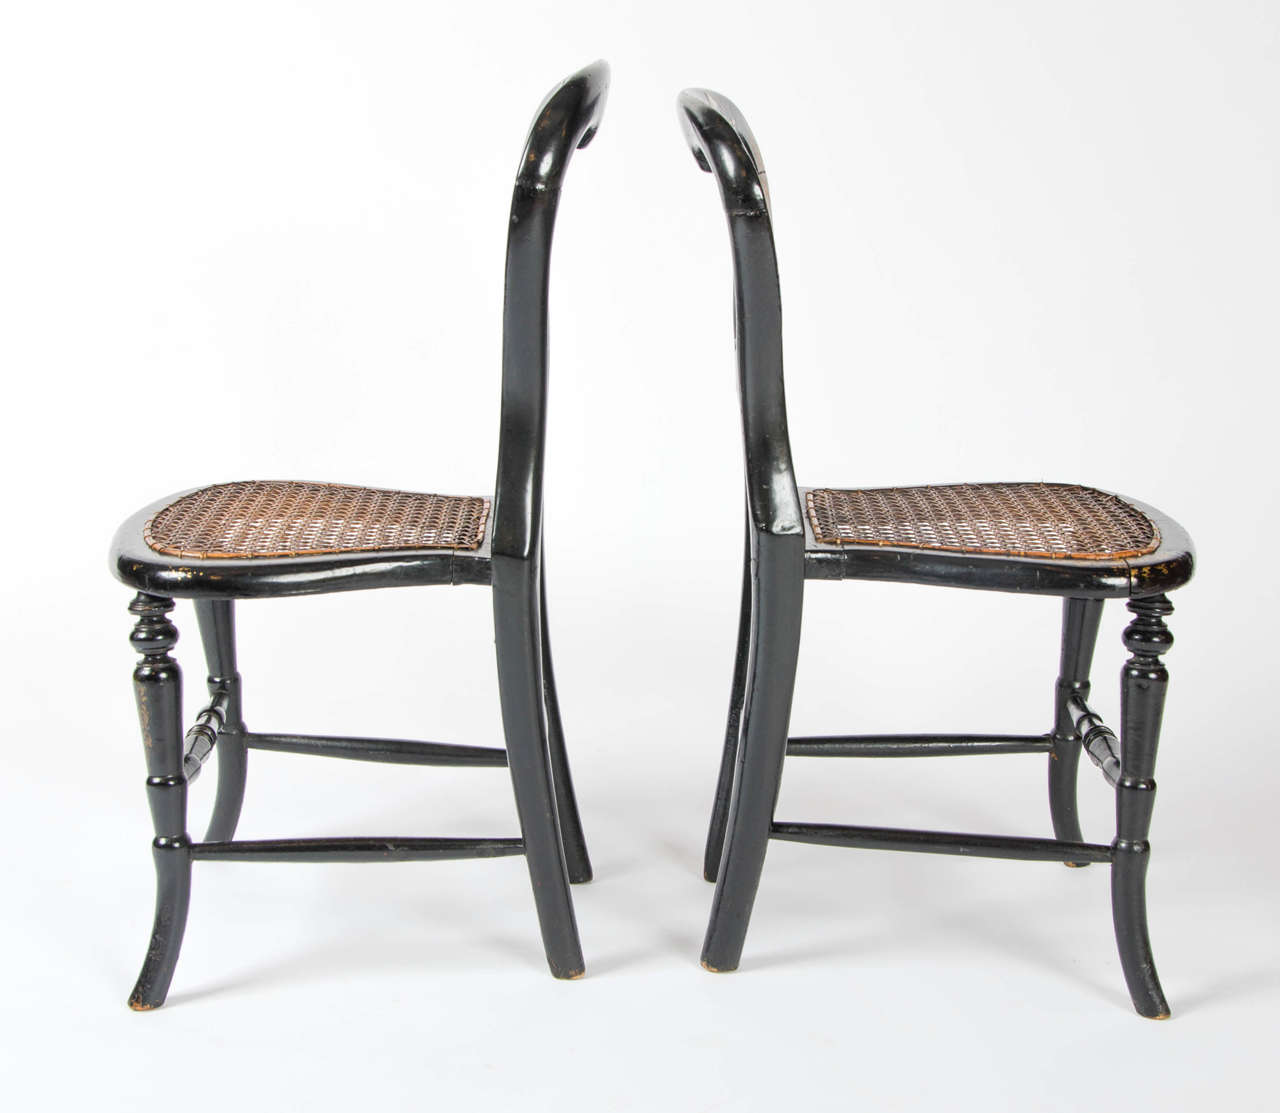 Caning Pair of Victorian Children's Chairs